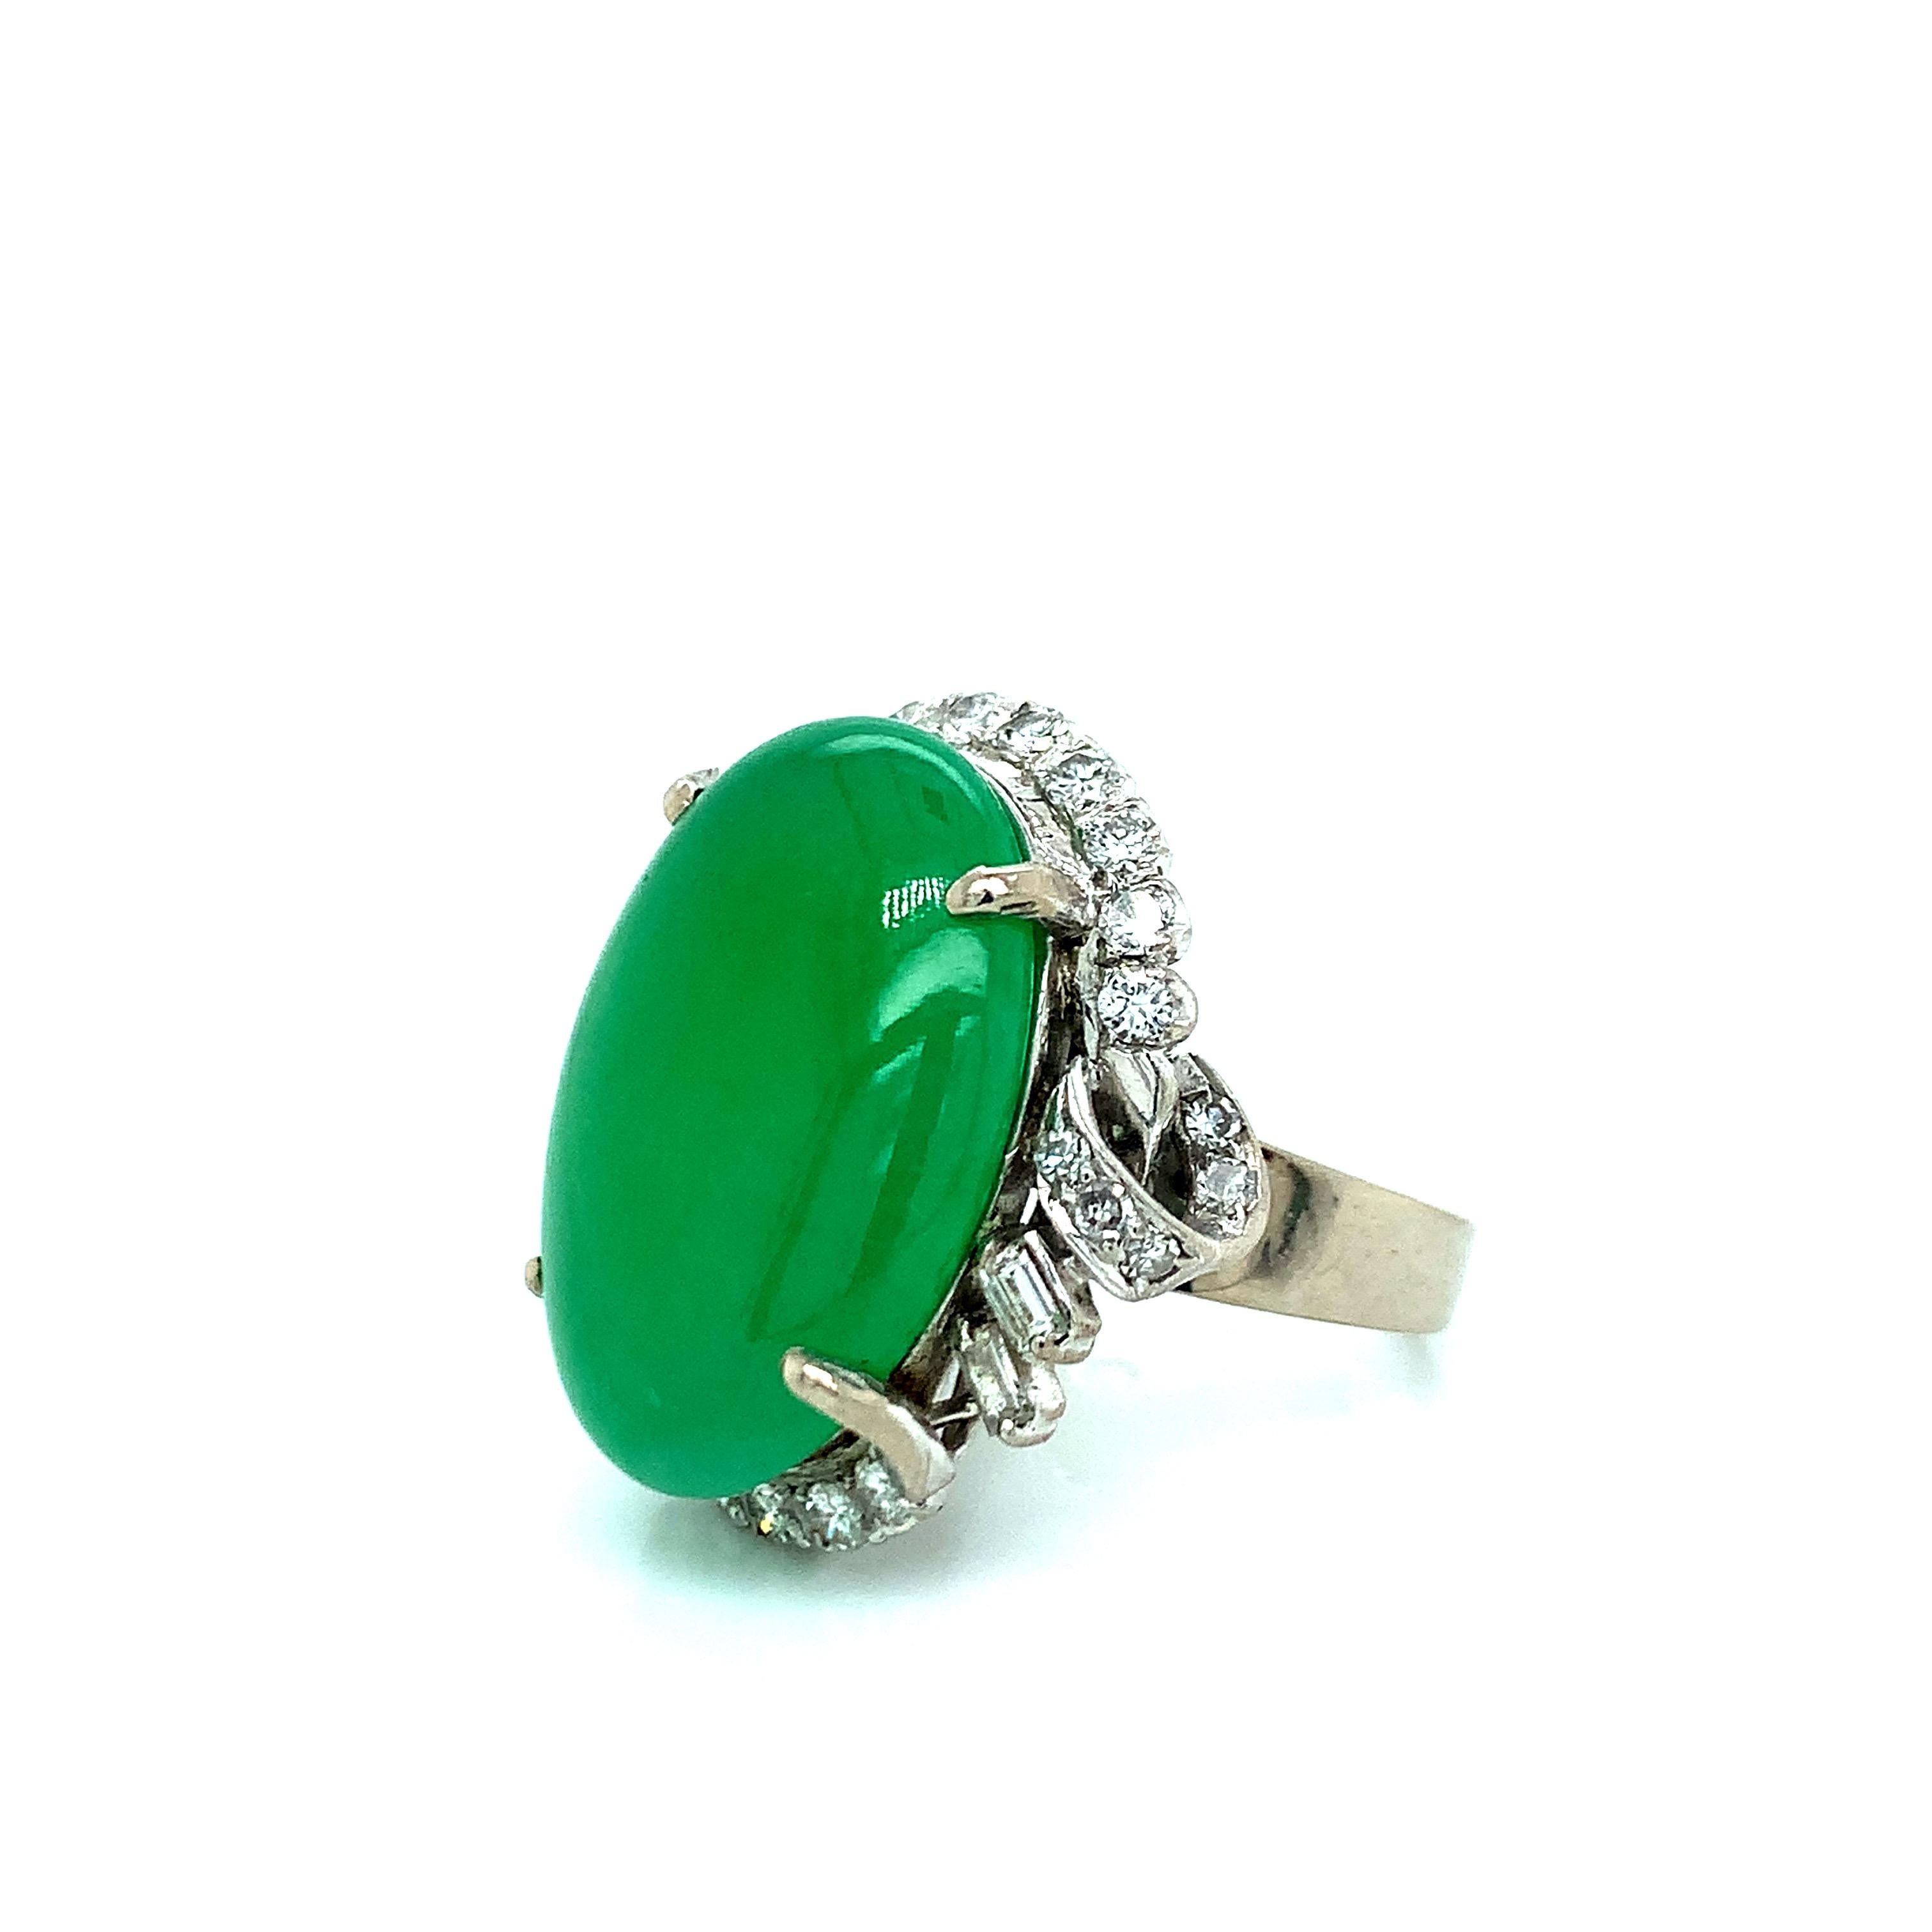 A 14 karat white gold ring that features one cabochon apple green jade gauged at 22.0 mm x 16.32 mm at its center. It is accented by a halo of thirty round full-cut and baguette-cut diamonds, totaling approximately 1.00 carat (graded H-I color and